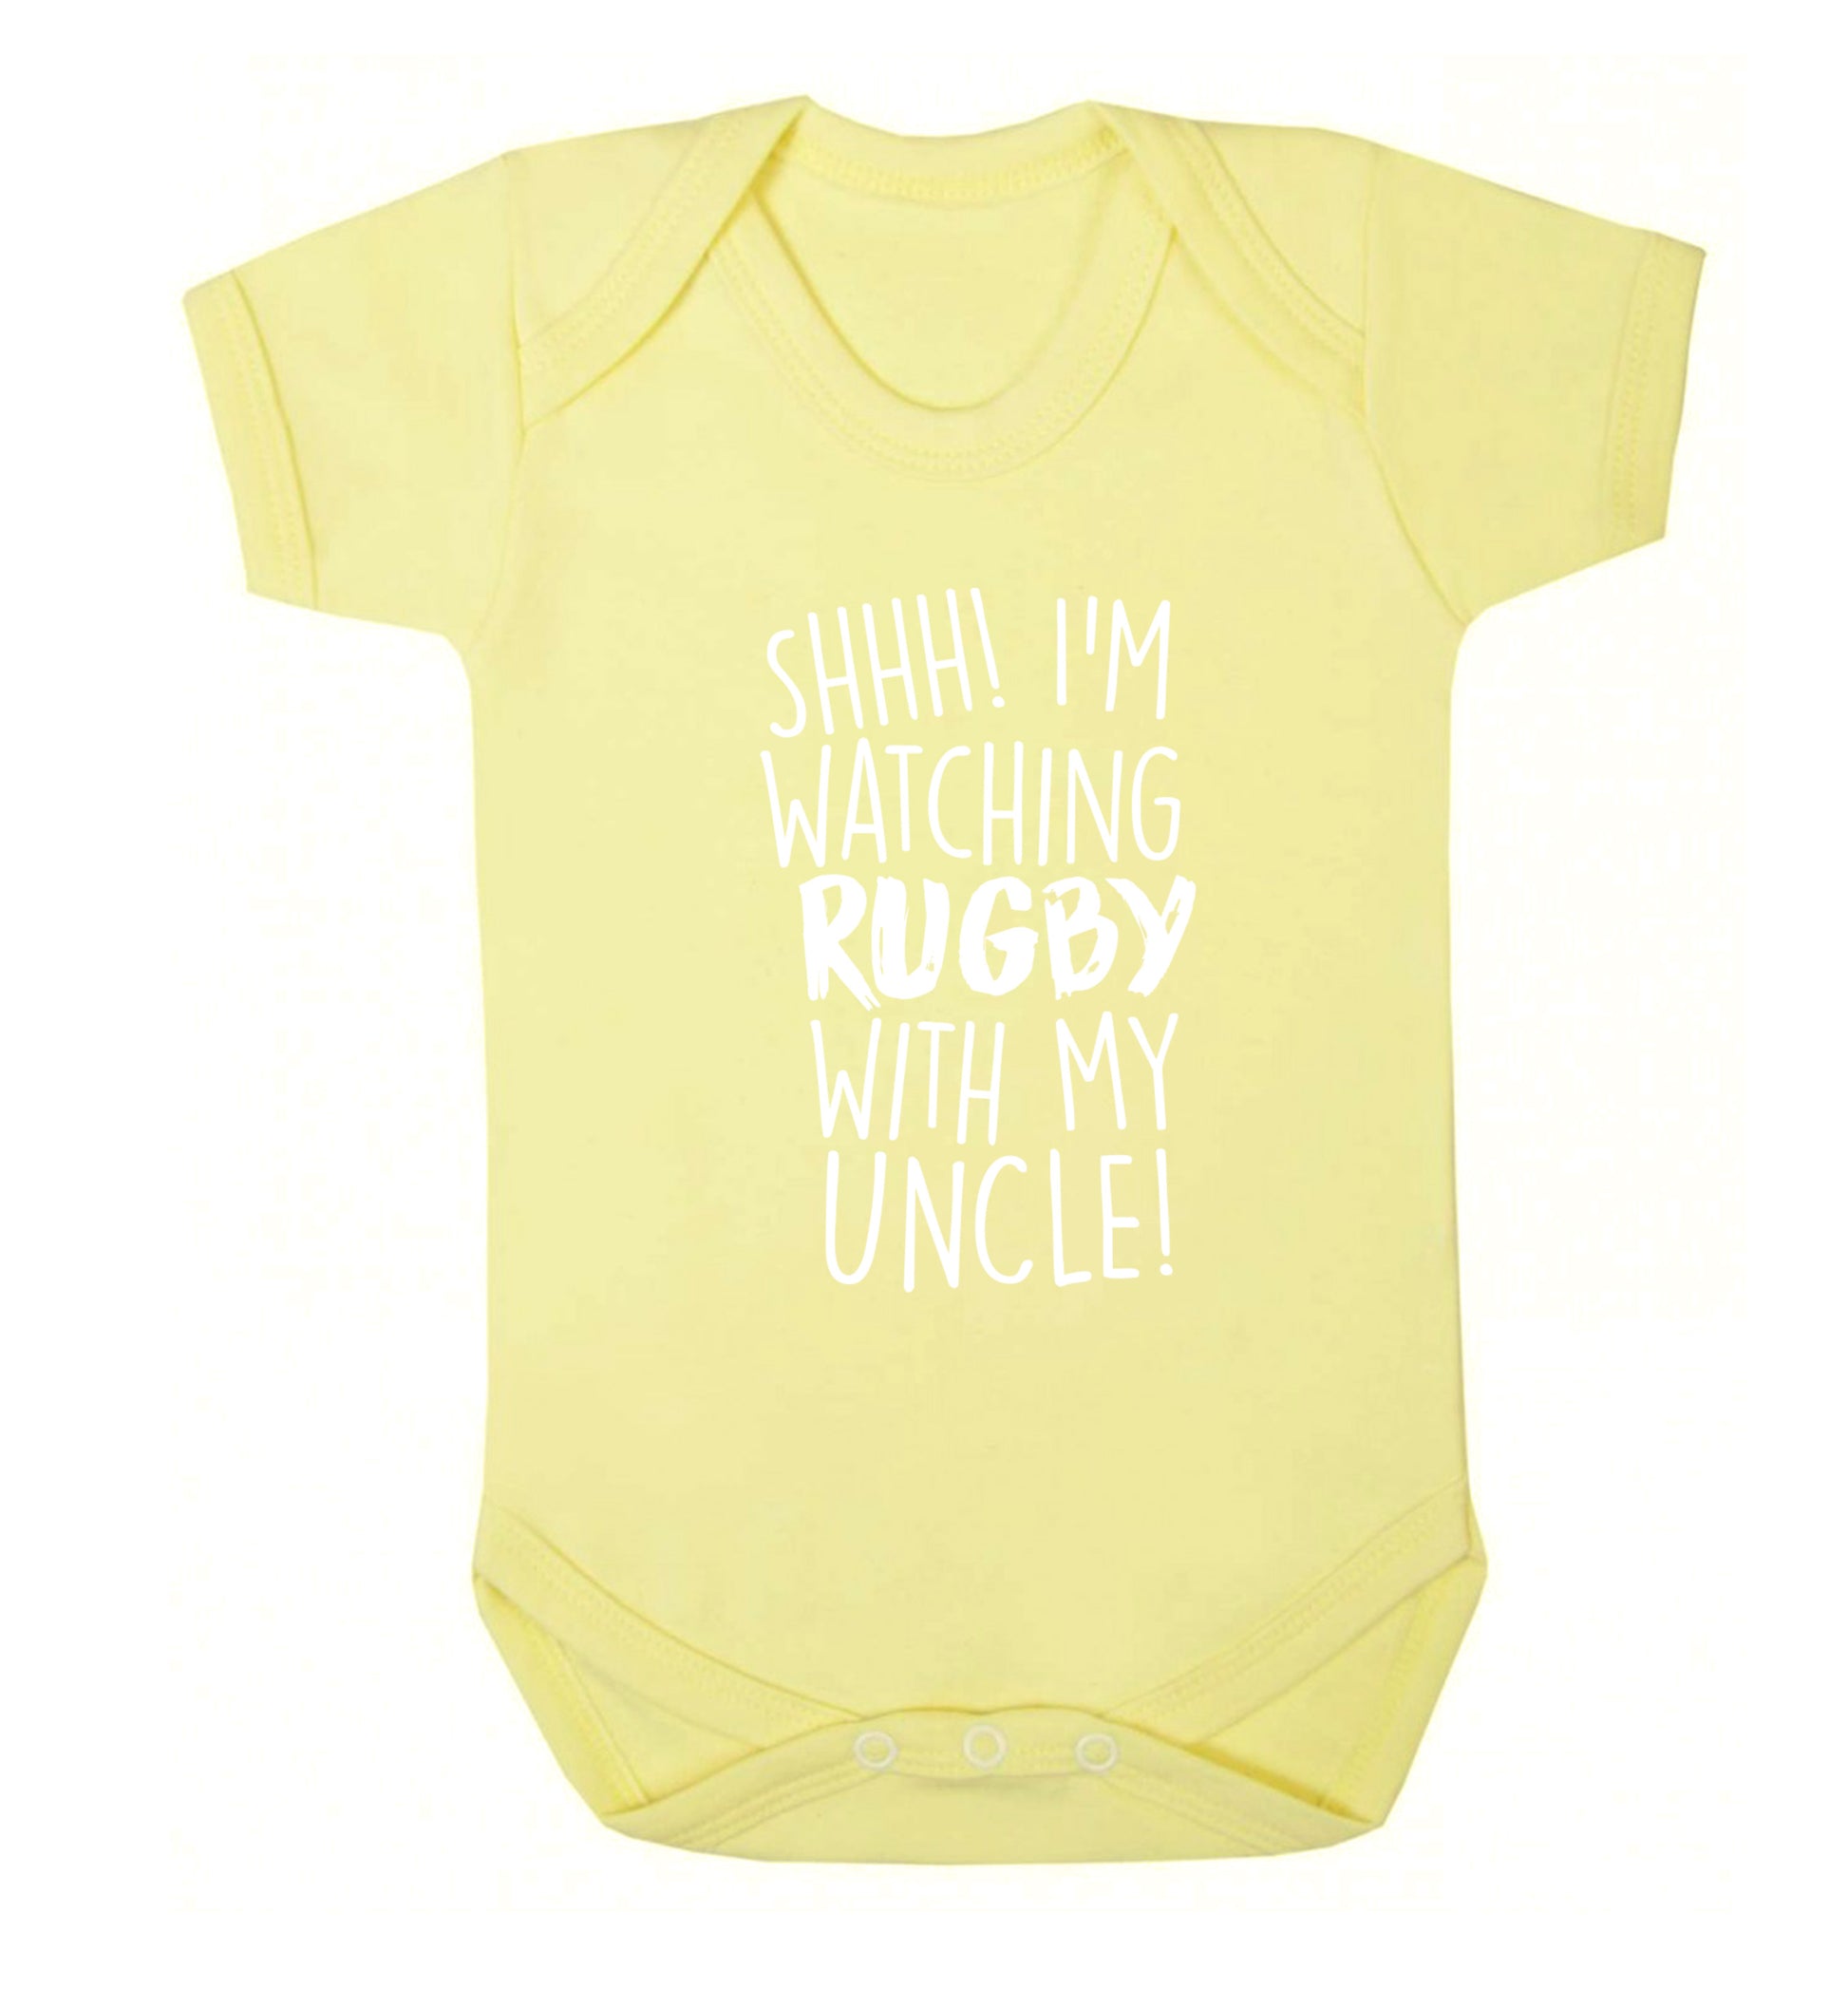 Shh.. I'm watching rugby with my uncle Baby Vest pale yellow 18-24 months